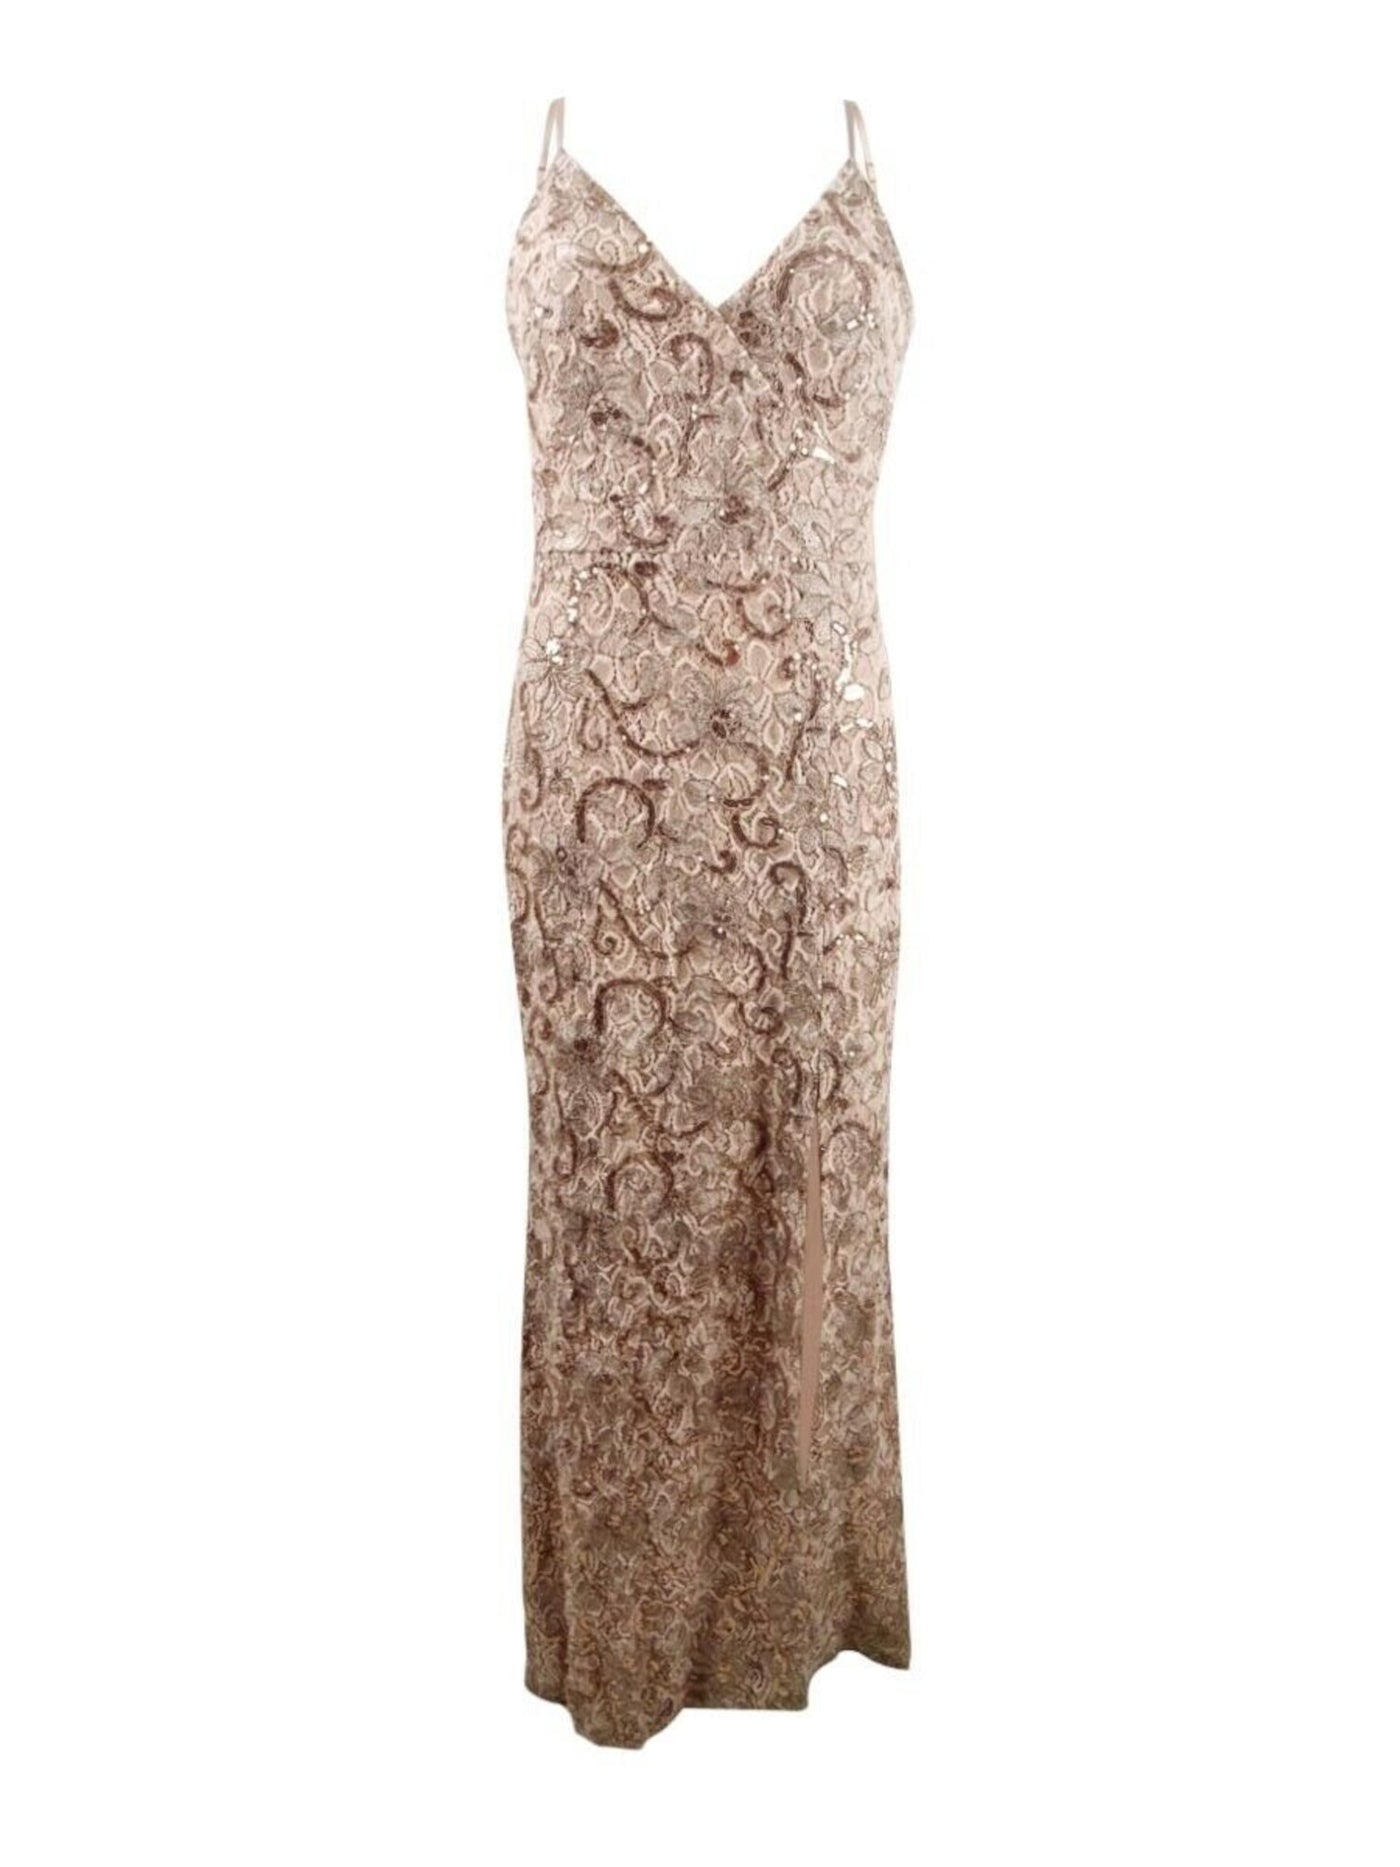 VINCE CAMUTO Womens Beige Sequined Lace Floral Spaghetti Strap V Neck Full-Length Formal Sheath Dress 6